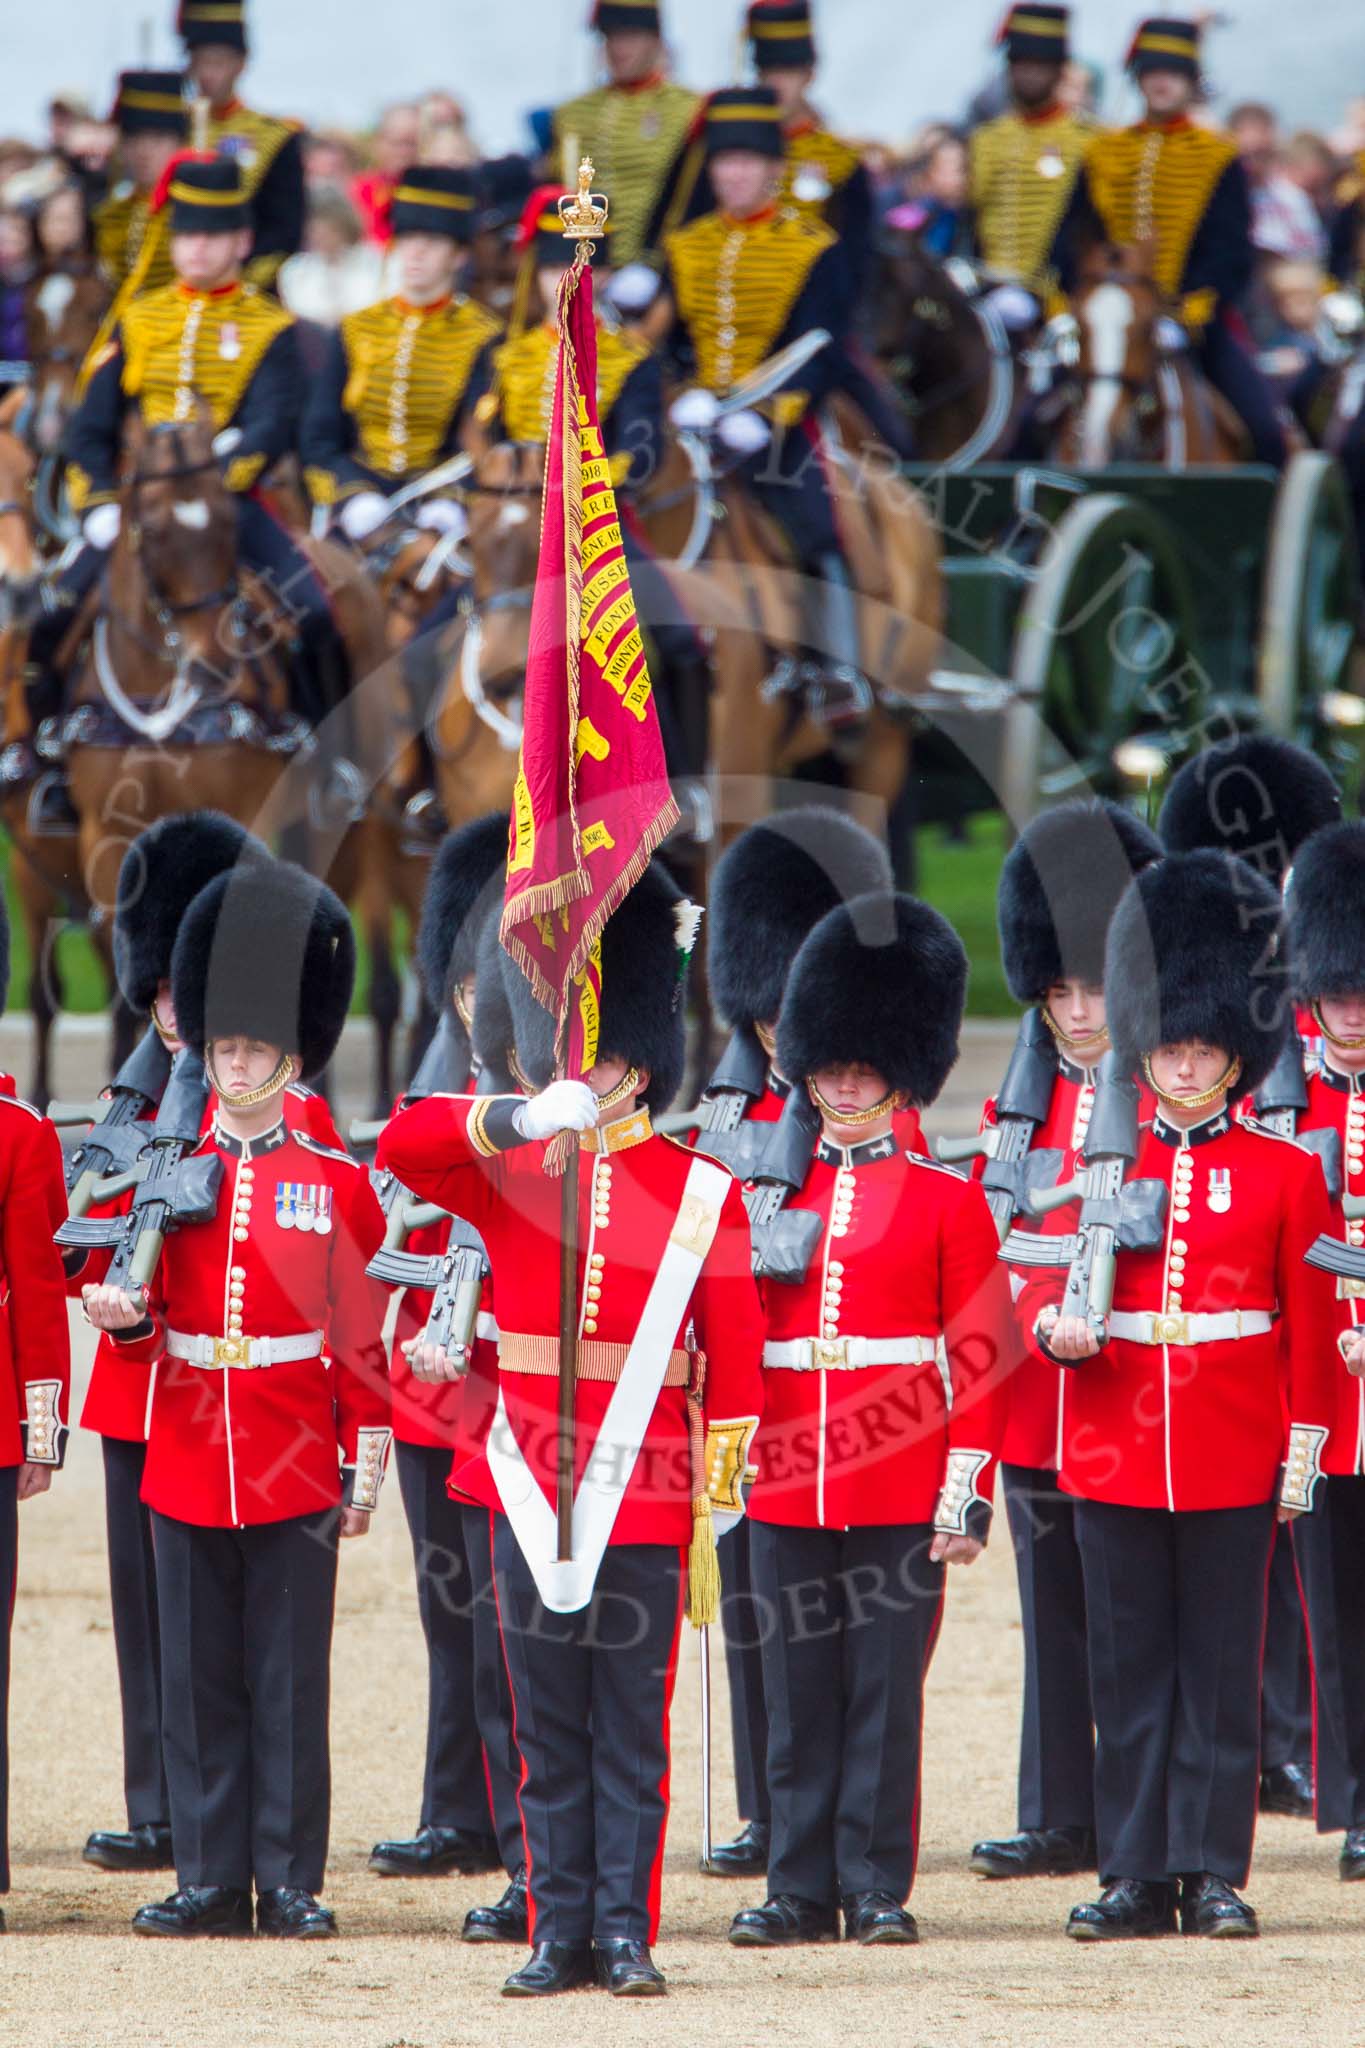 Trooping the Colour 2013: The Ensign, Second Lieutenant Joel Dinwiddle, and the Escort to the Colour,are back at their initial position, when they were the Escort for the Colour. Image #505, 15 June 2013 11:28 Horse Guards Parade, London, UK